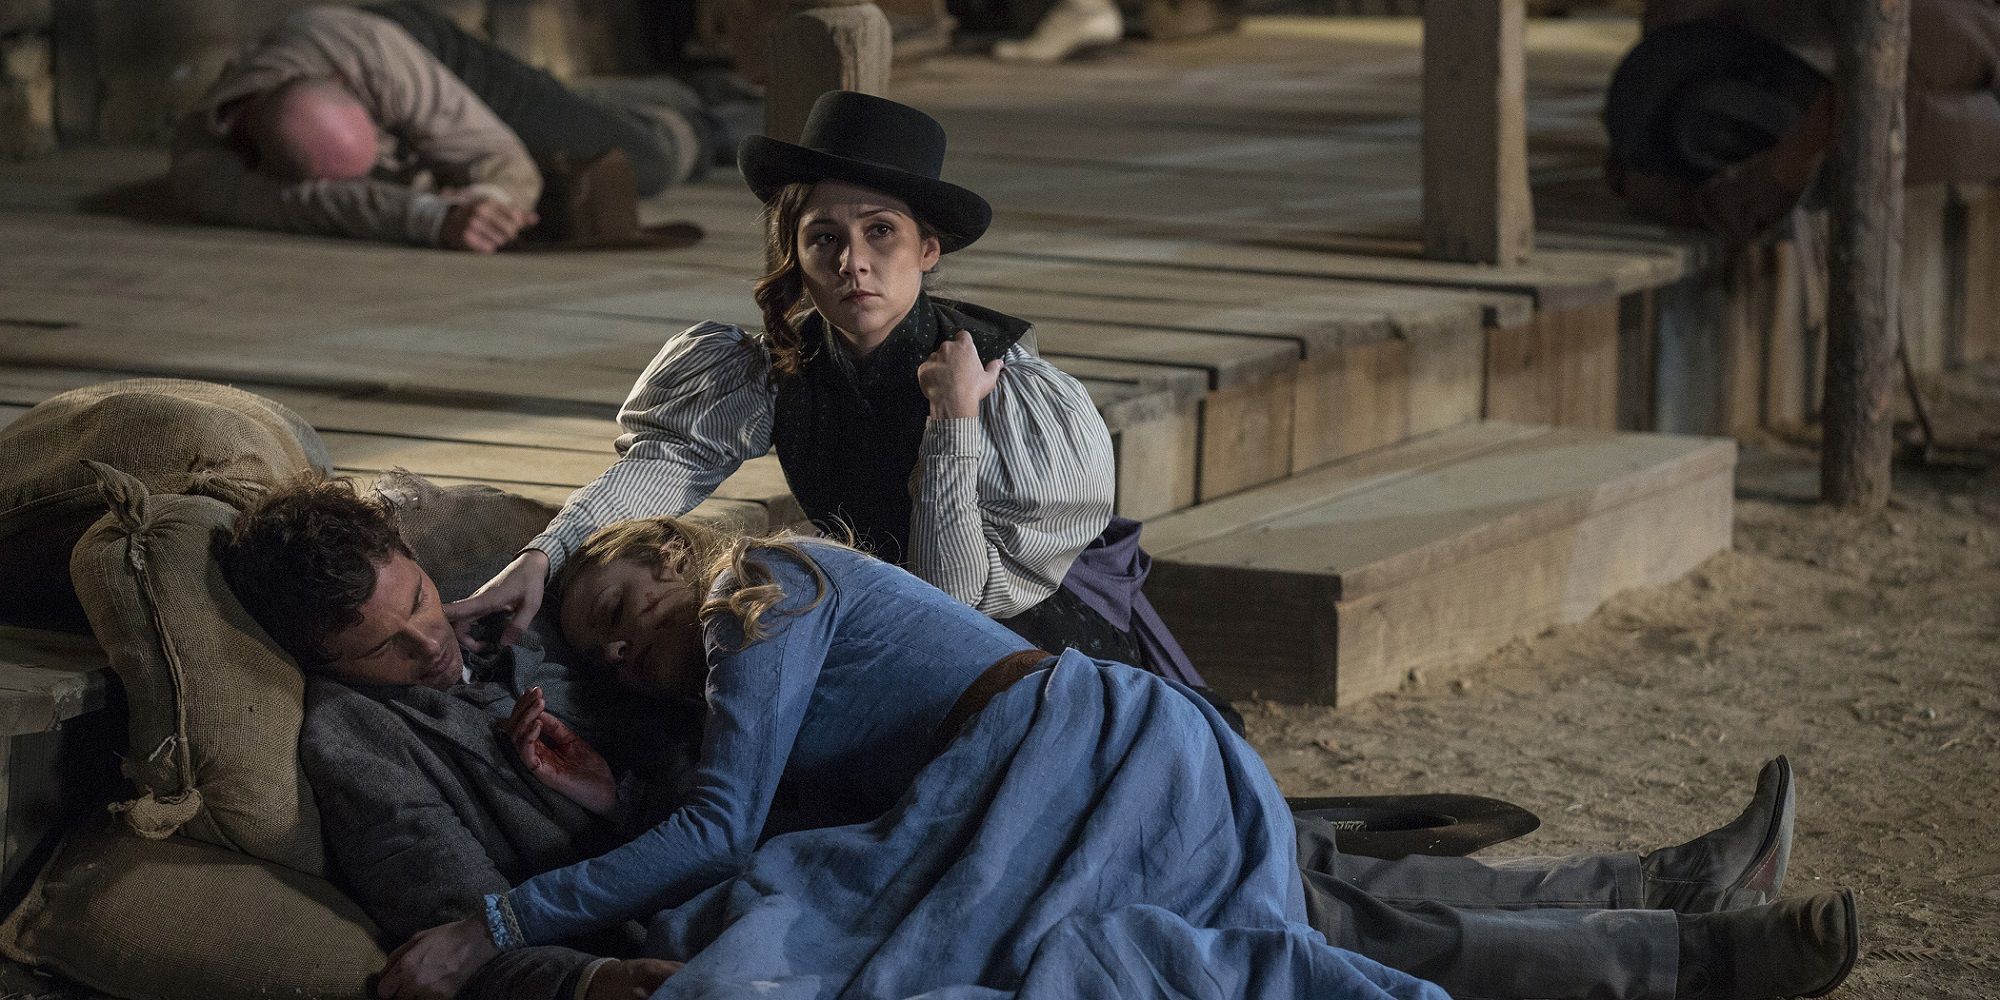 Death and violence in HBO's Westworld